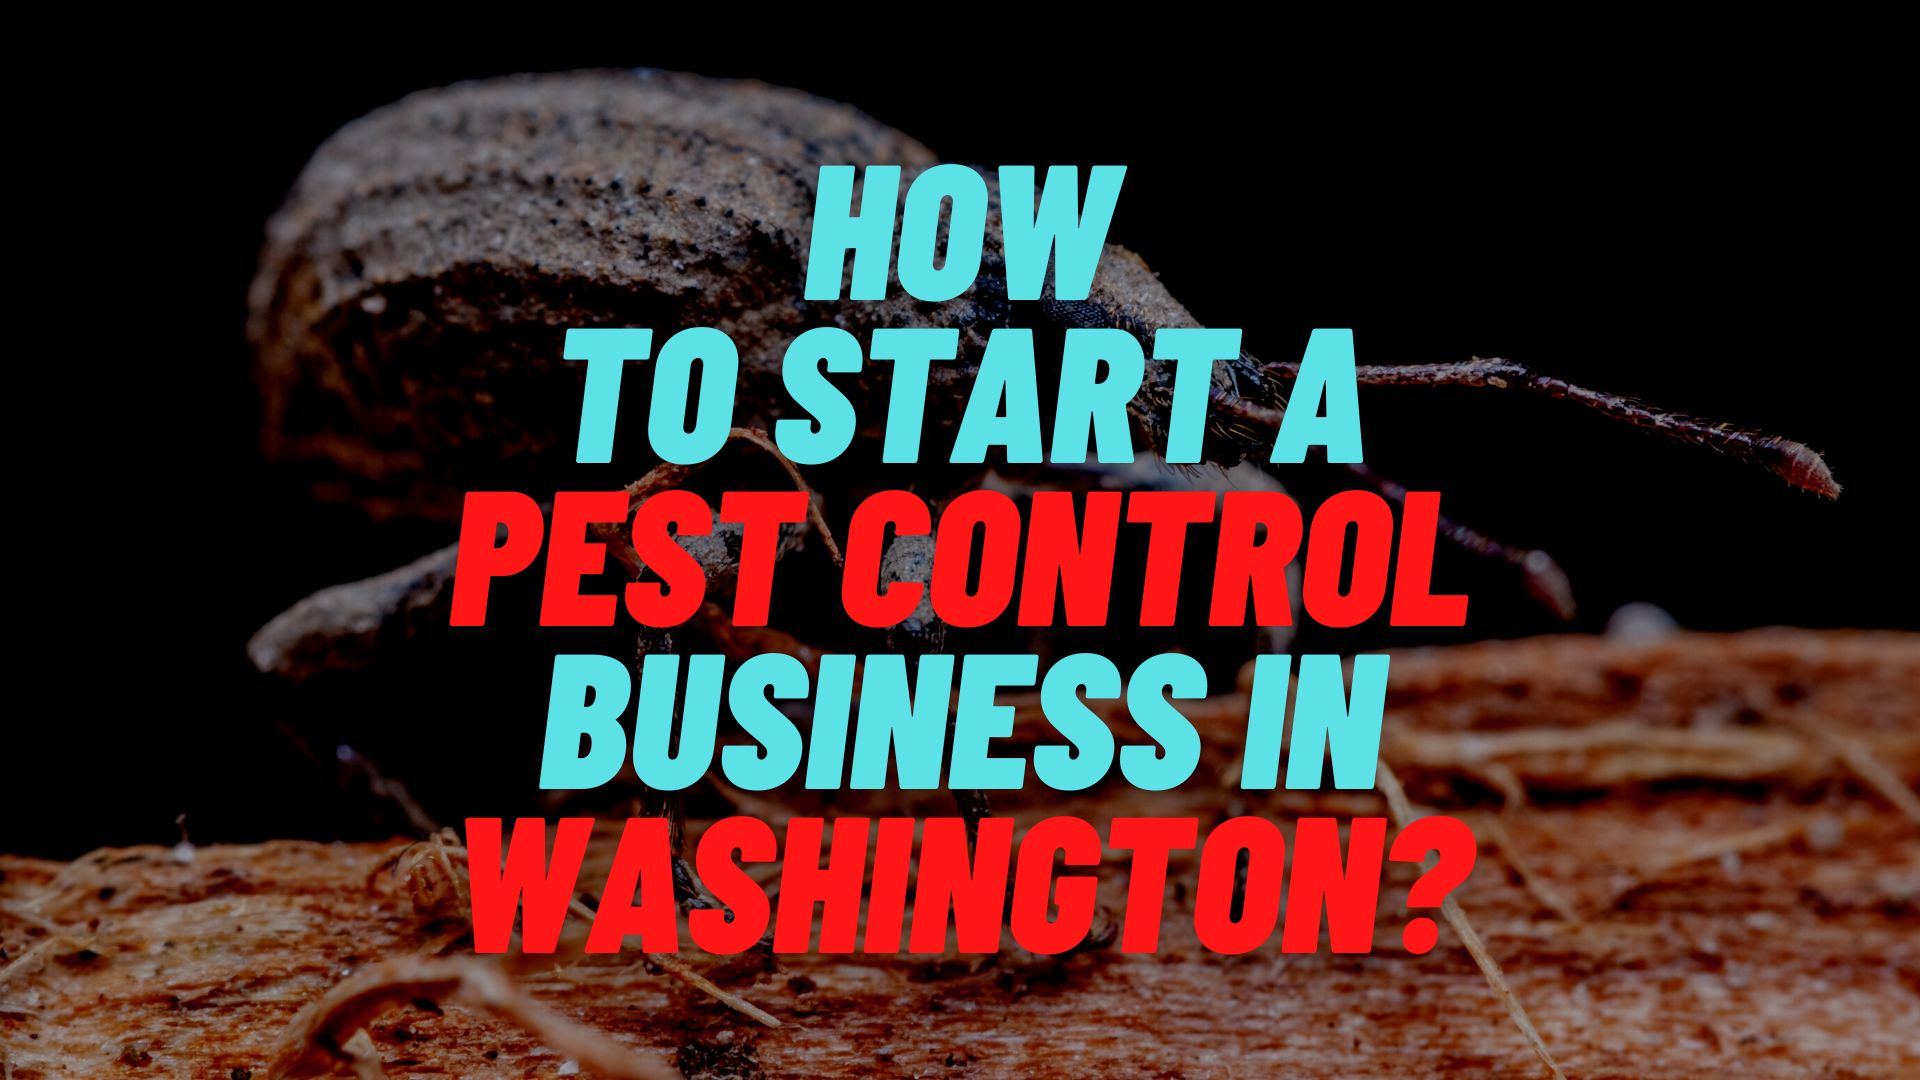 How to start a pest control business in Washington?